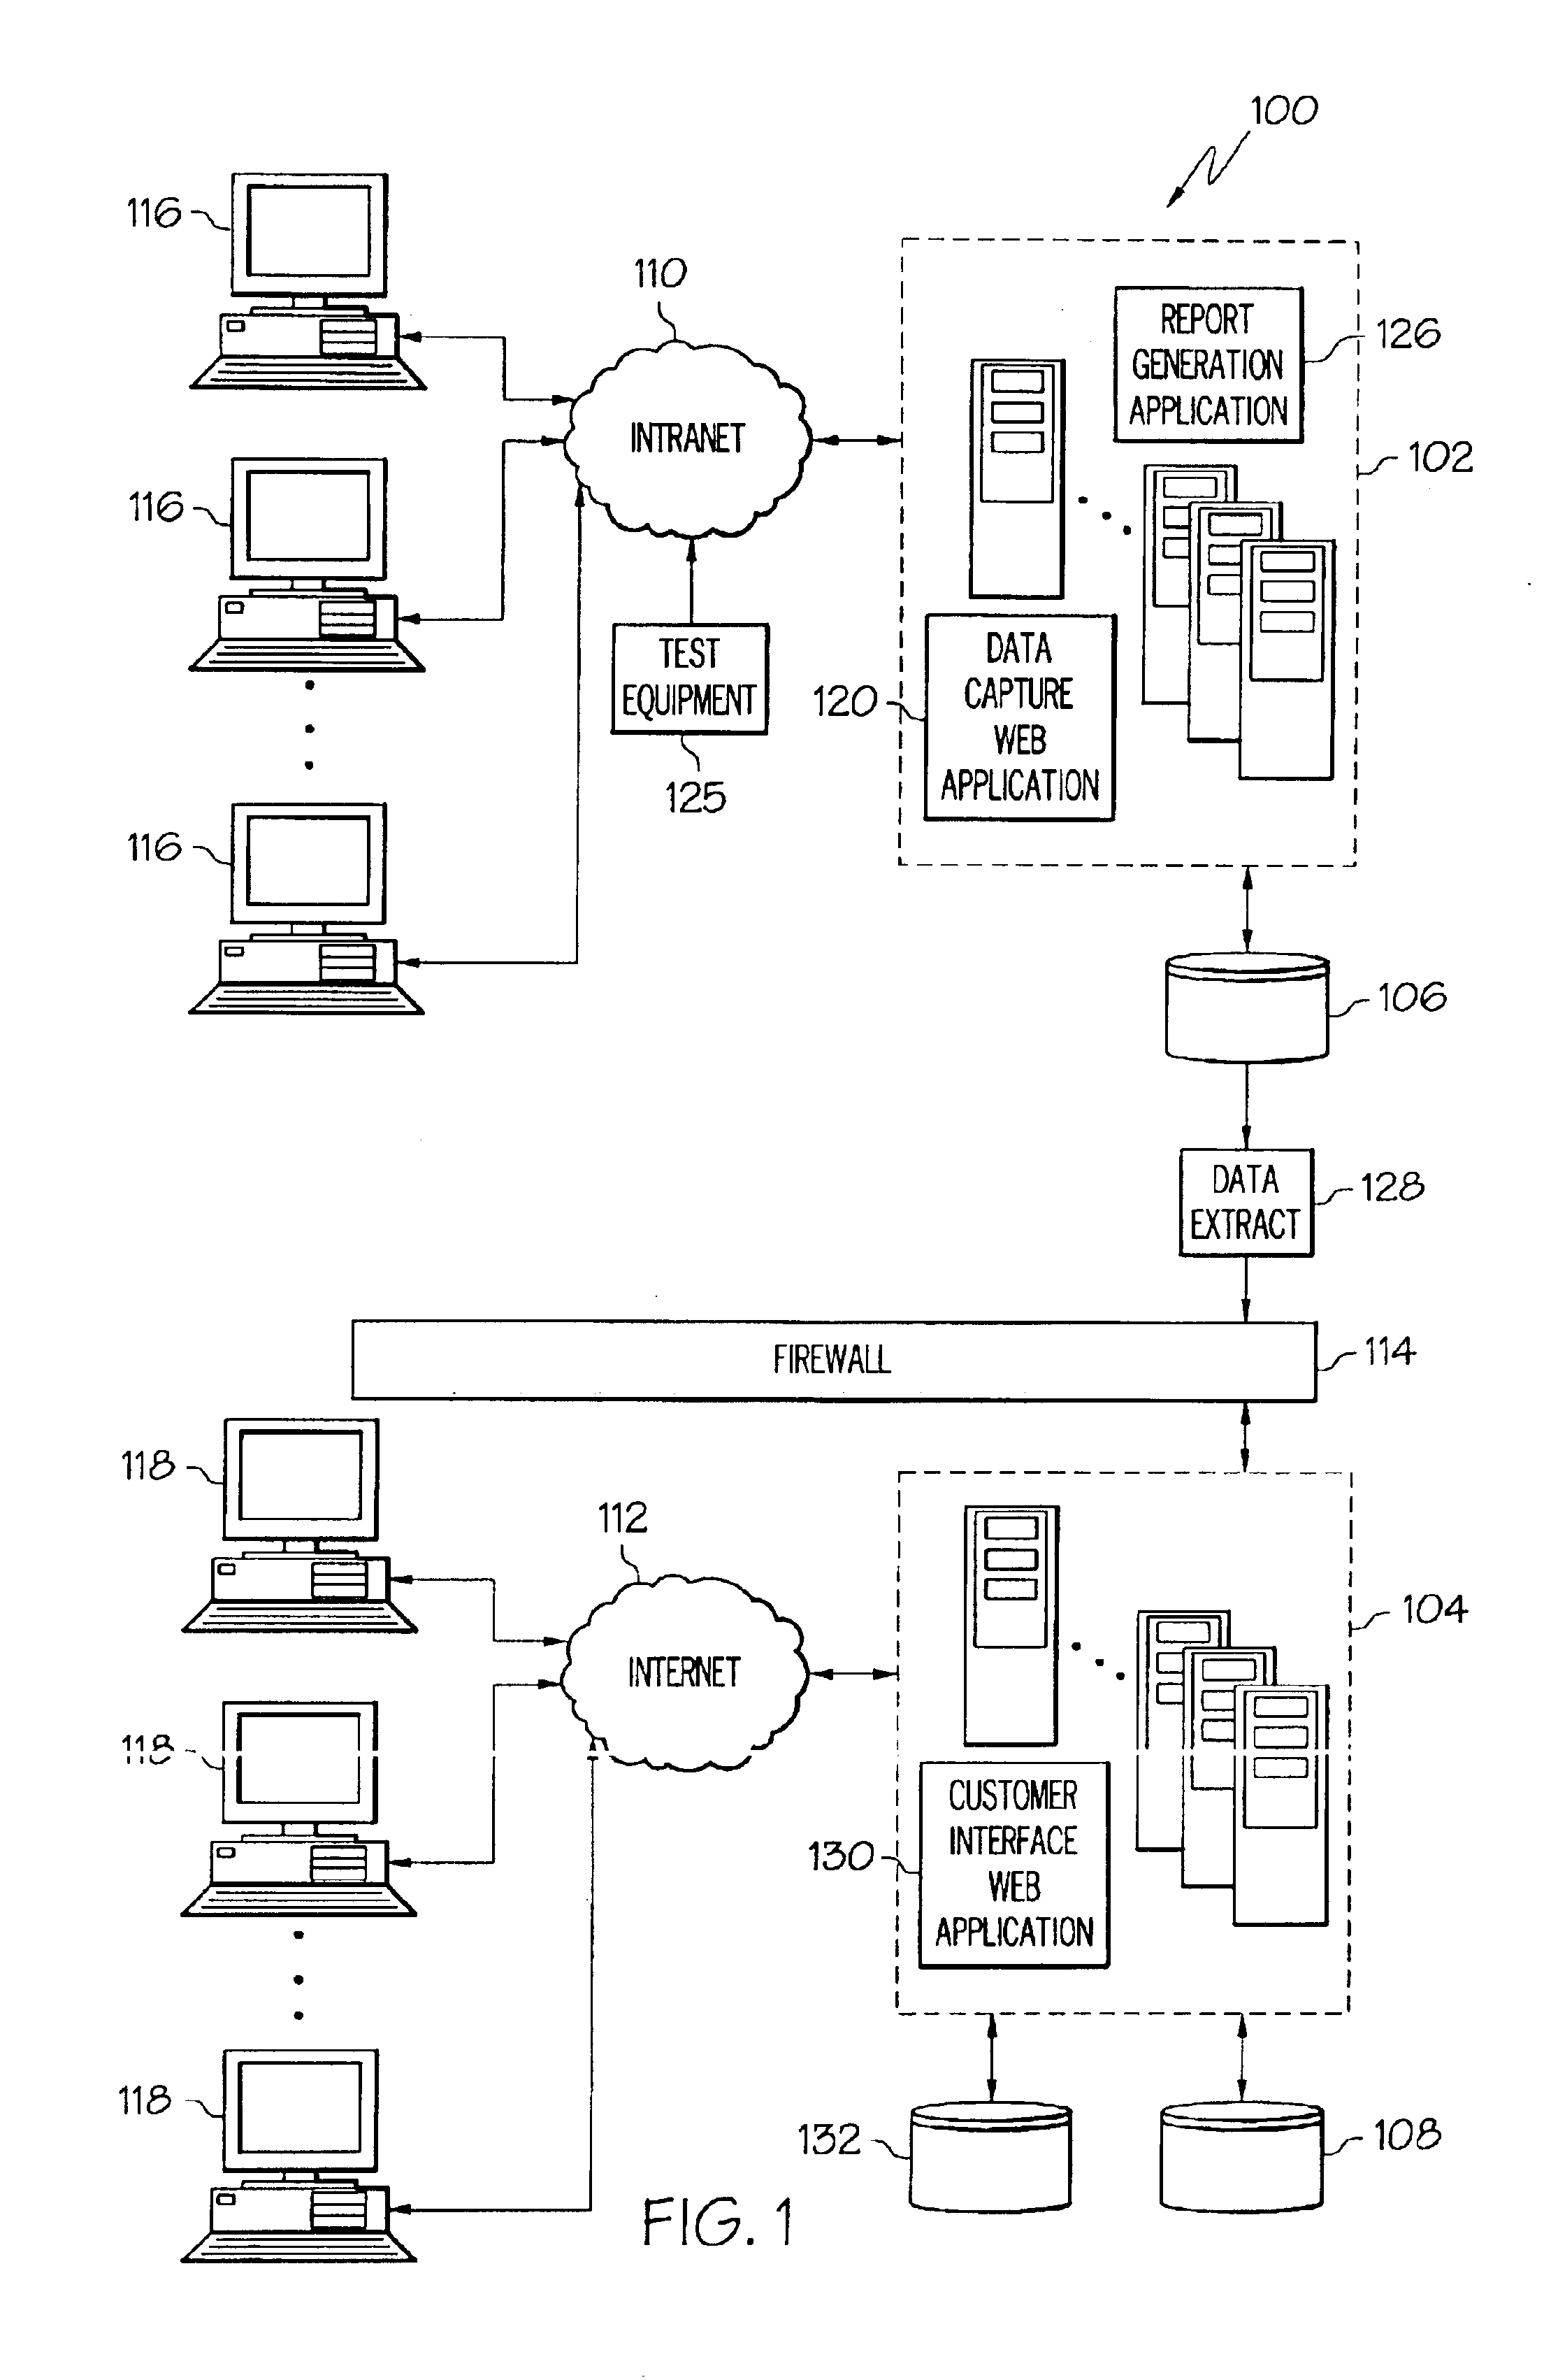 System and method for efficiently capturing and reporting maintenance, repair, and overhaul data